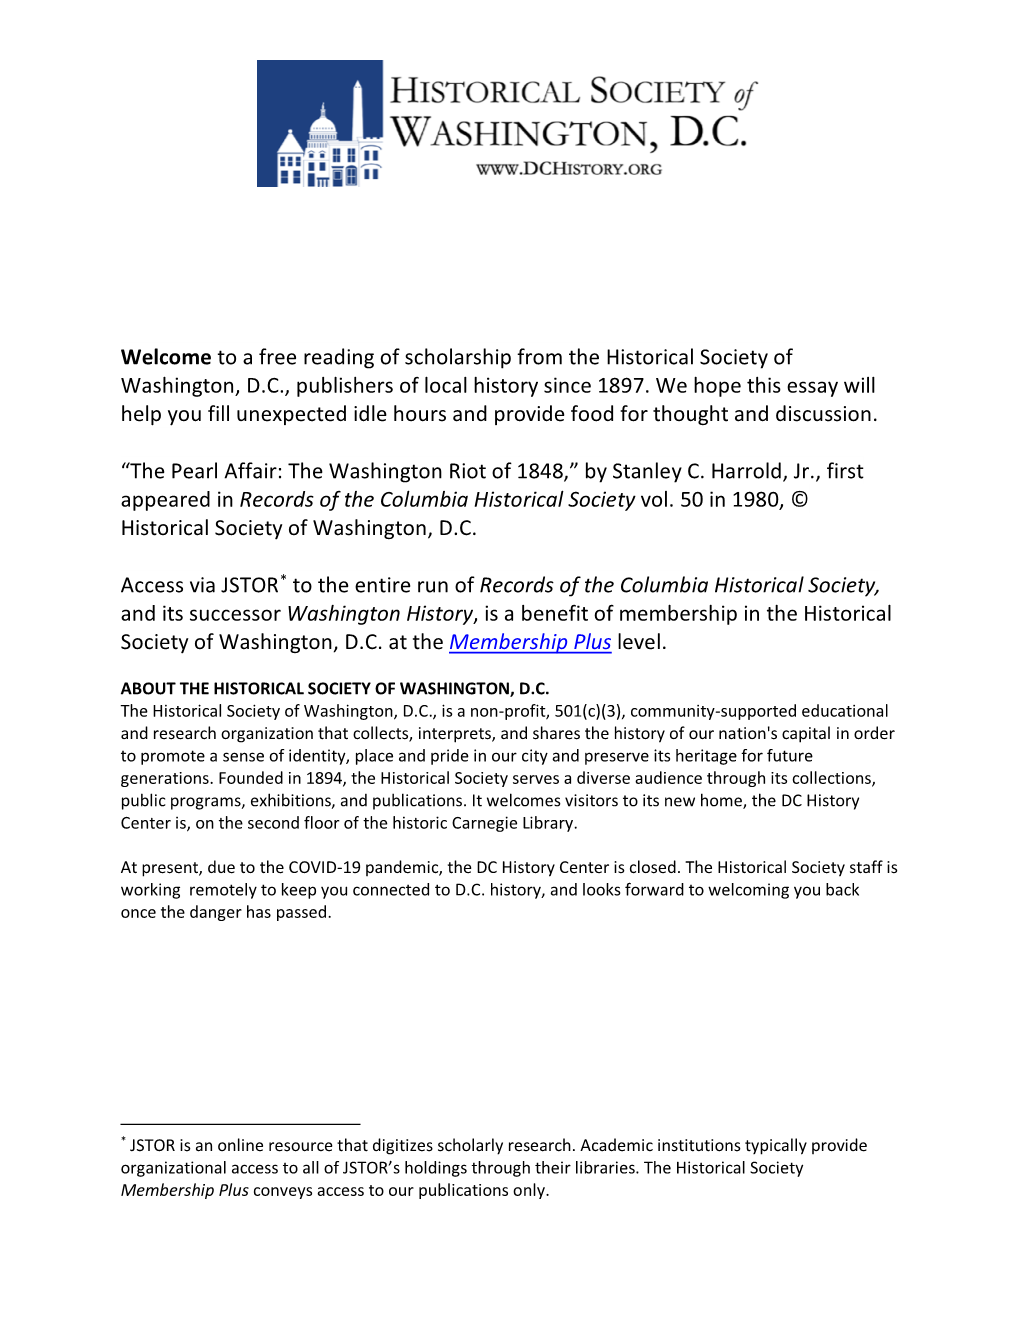 Welcome to a Free Reading of Scholarship from the Historical Society of Washington, D.C., Publishers of Local History Since 1897